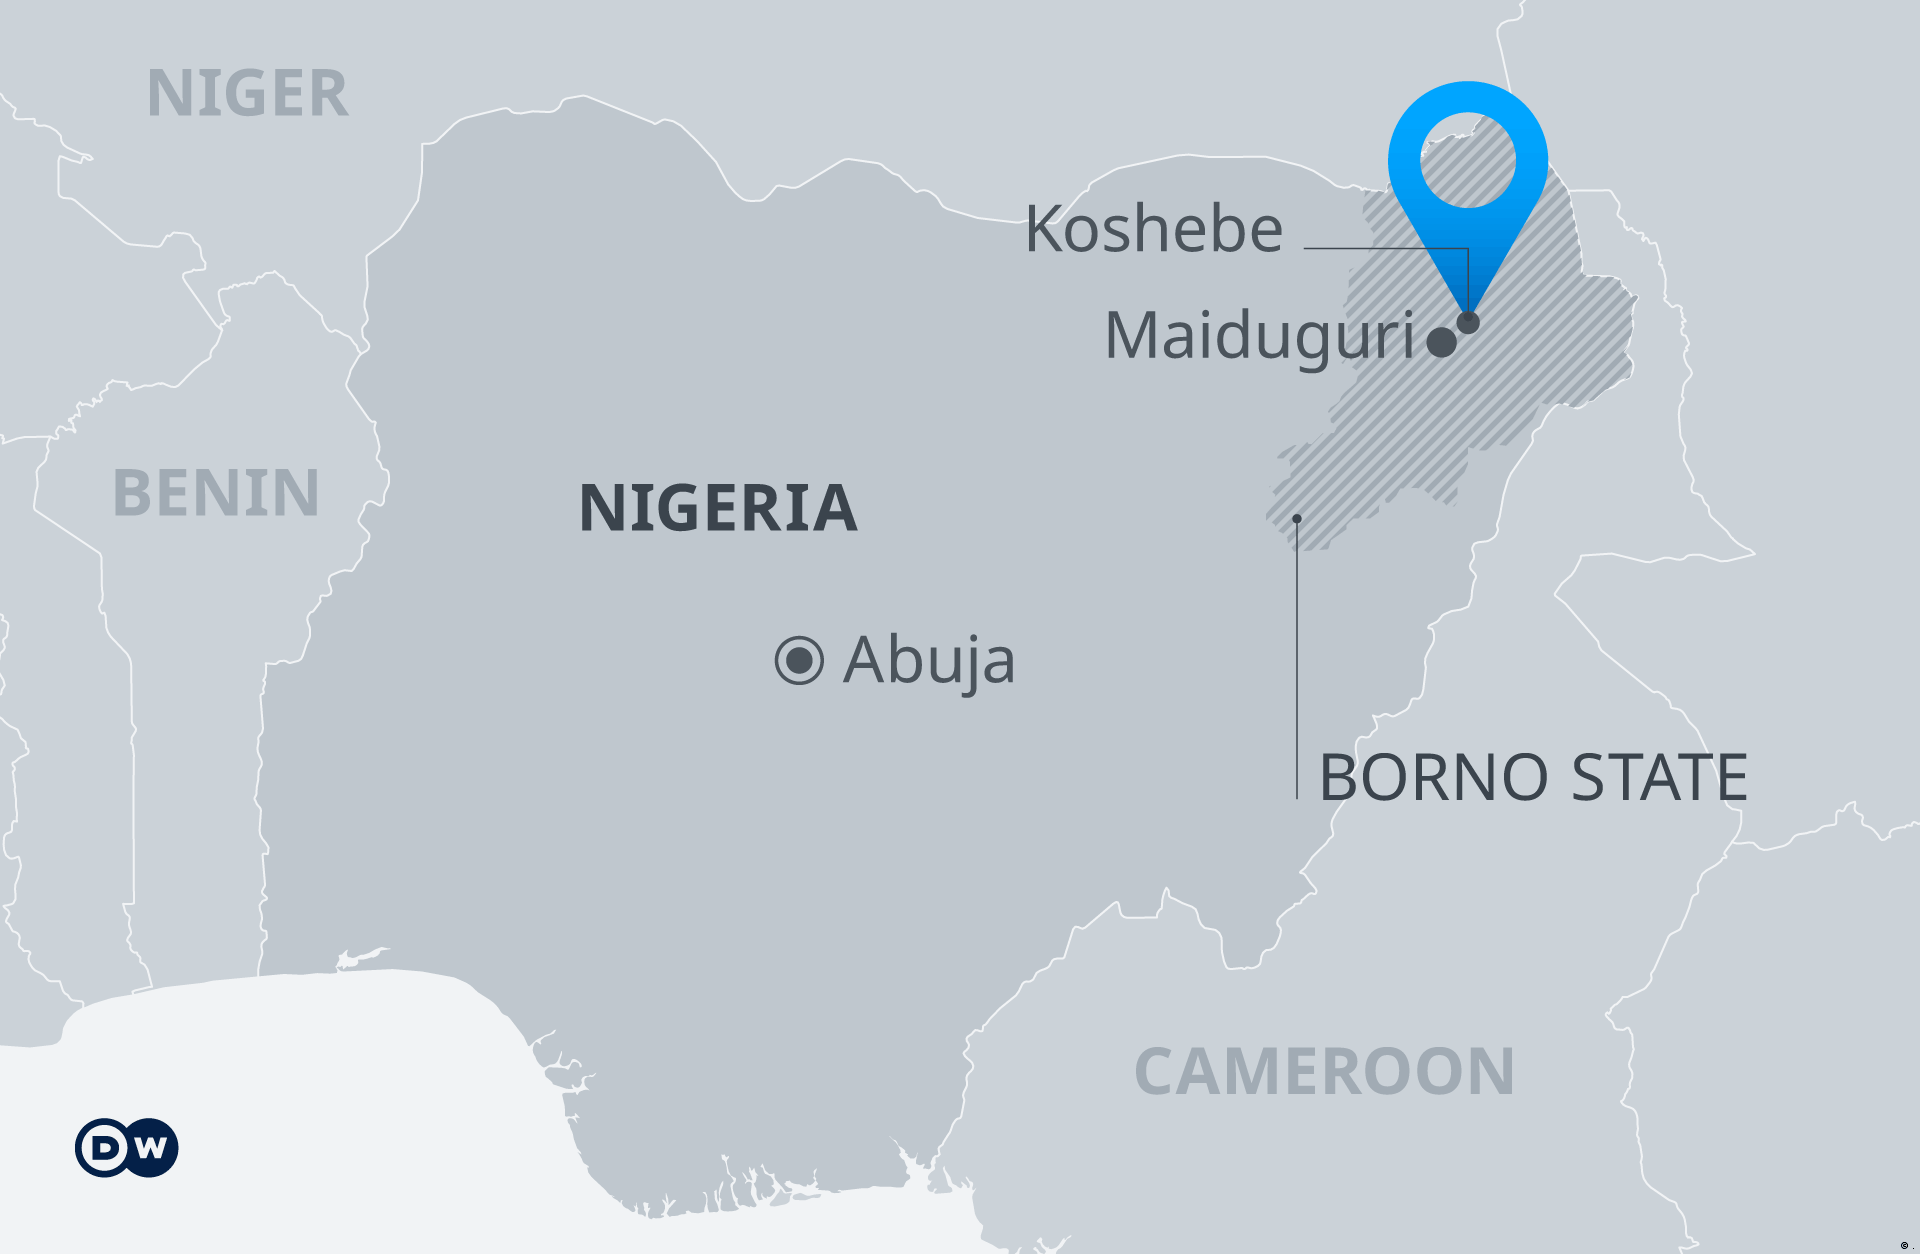 map showing Nigeria with the affected Borno State